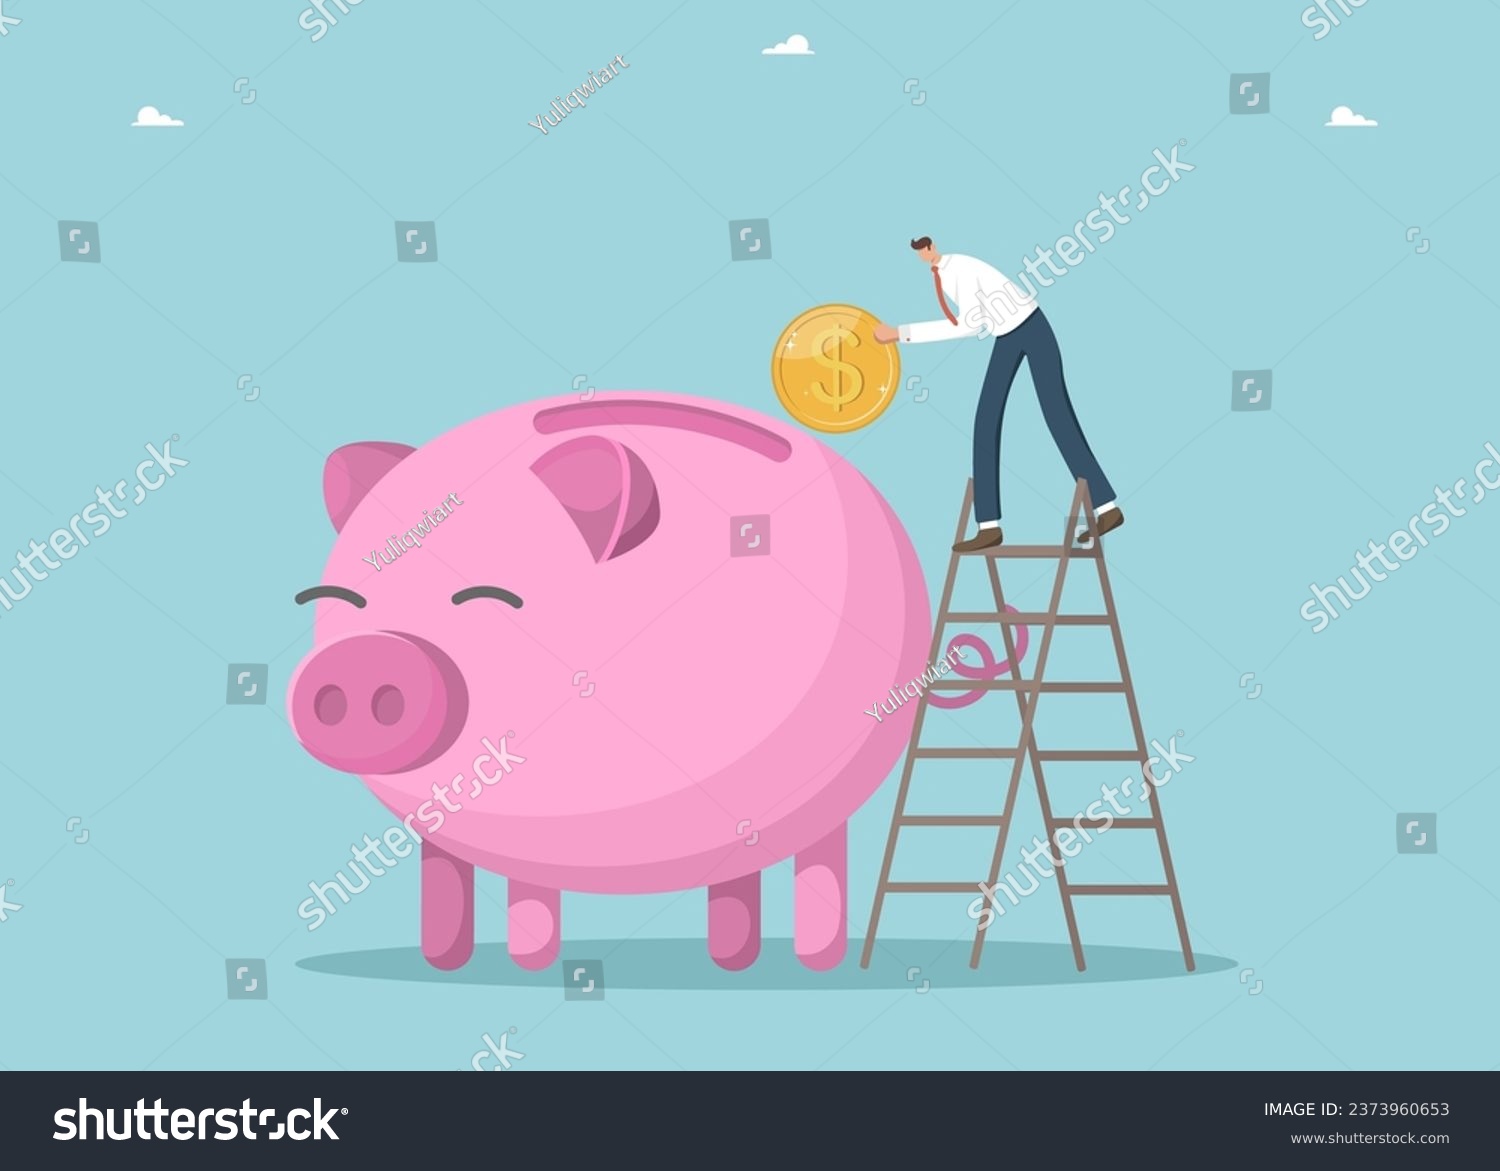 SVG of Investing in investments and stocks, increasing savings and creating deposit boxes, achieving significant success in asset management, financial growth, a man throws a coin into a piggy bank. svg